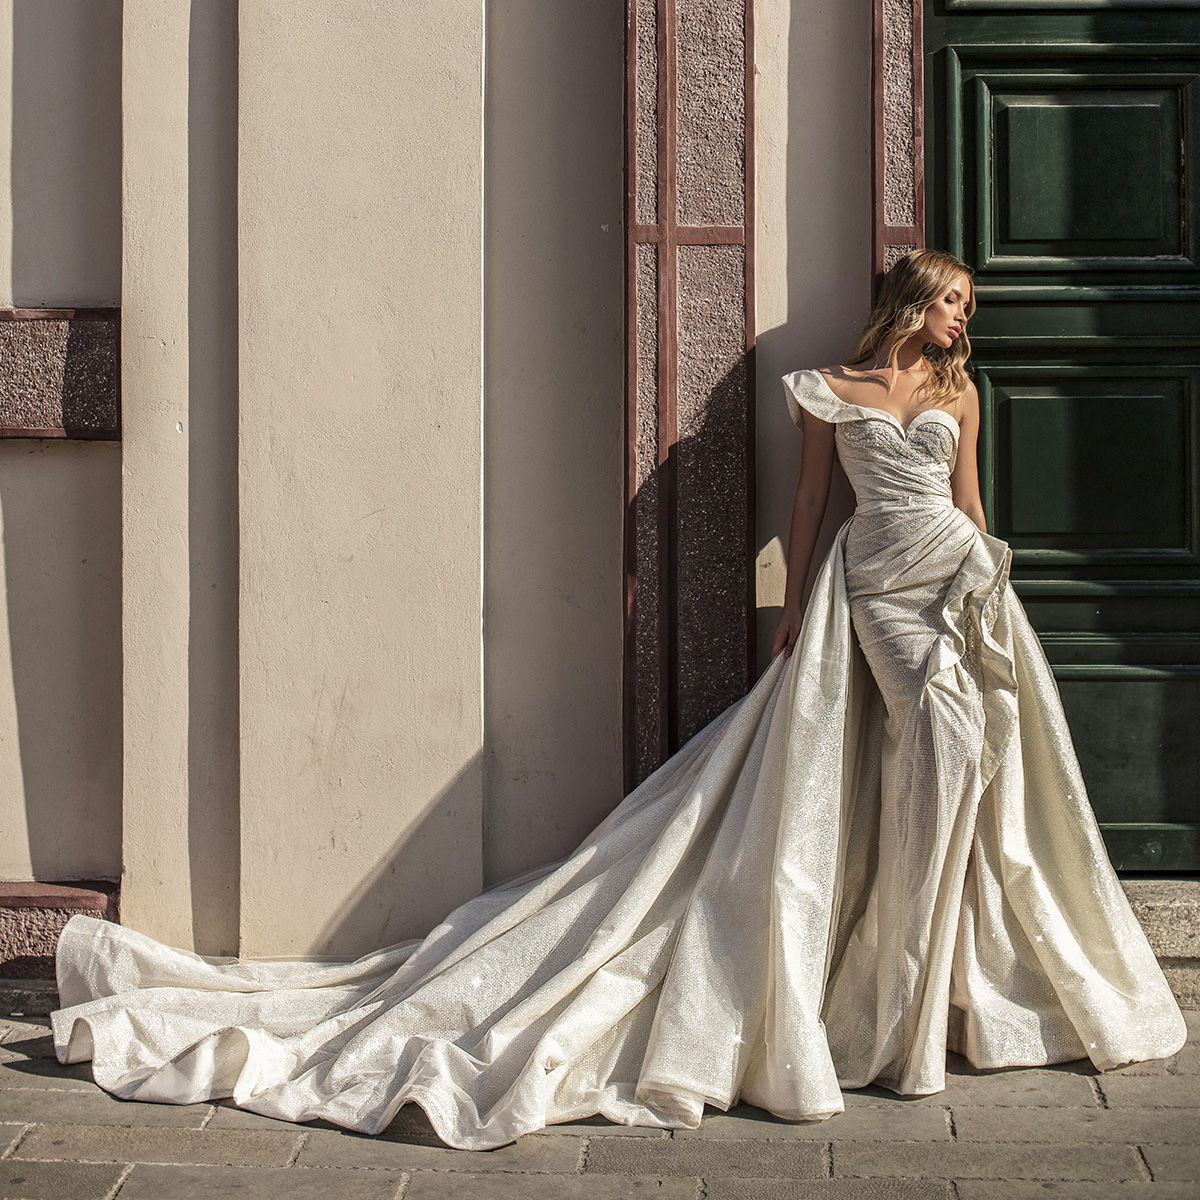 wona 2020 couture bridal wedding inspirasi featured wedding gowns dresses and collection